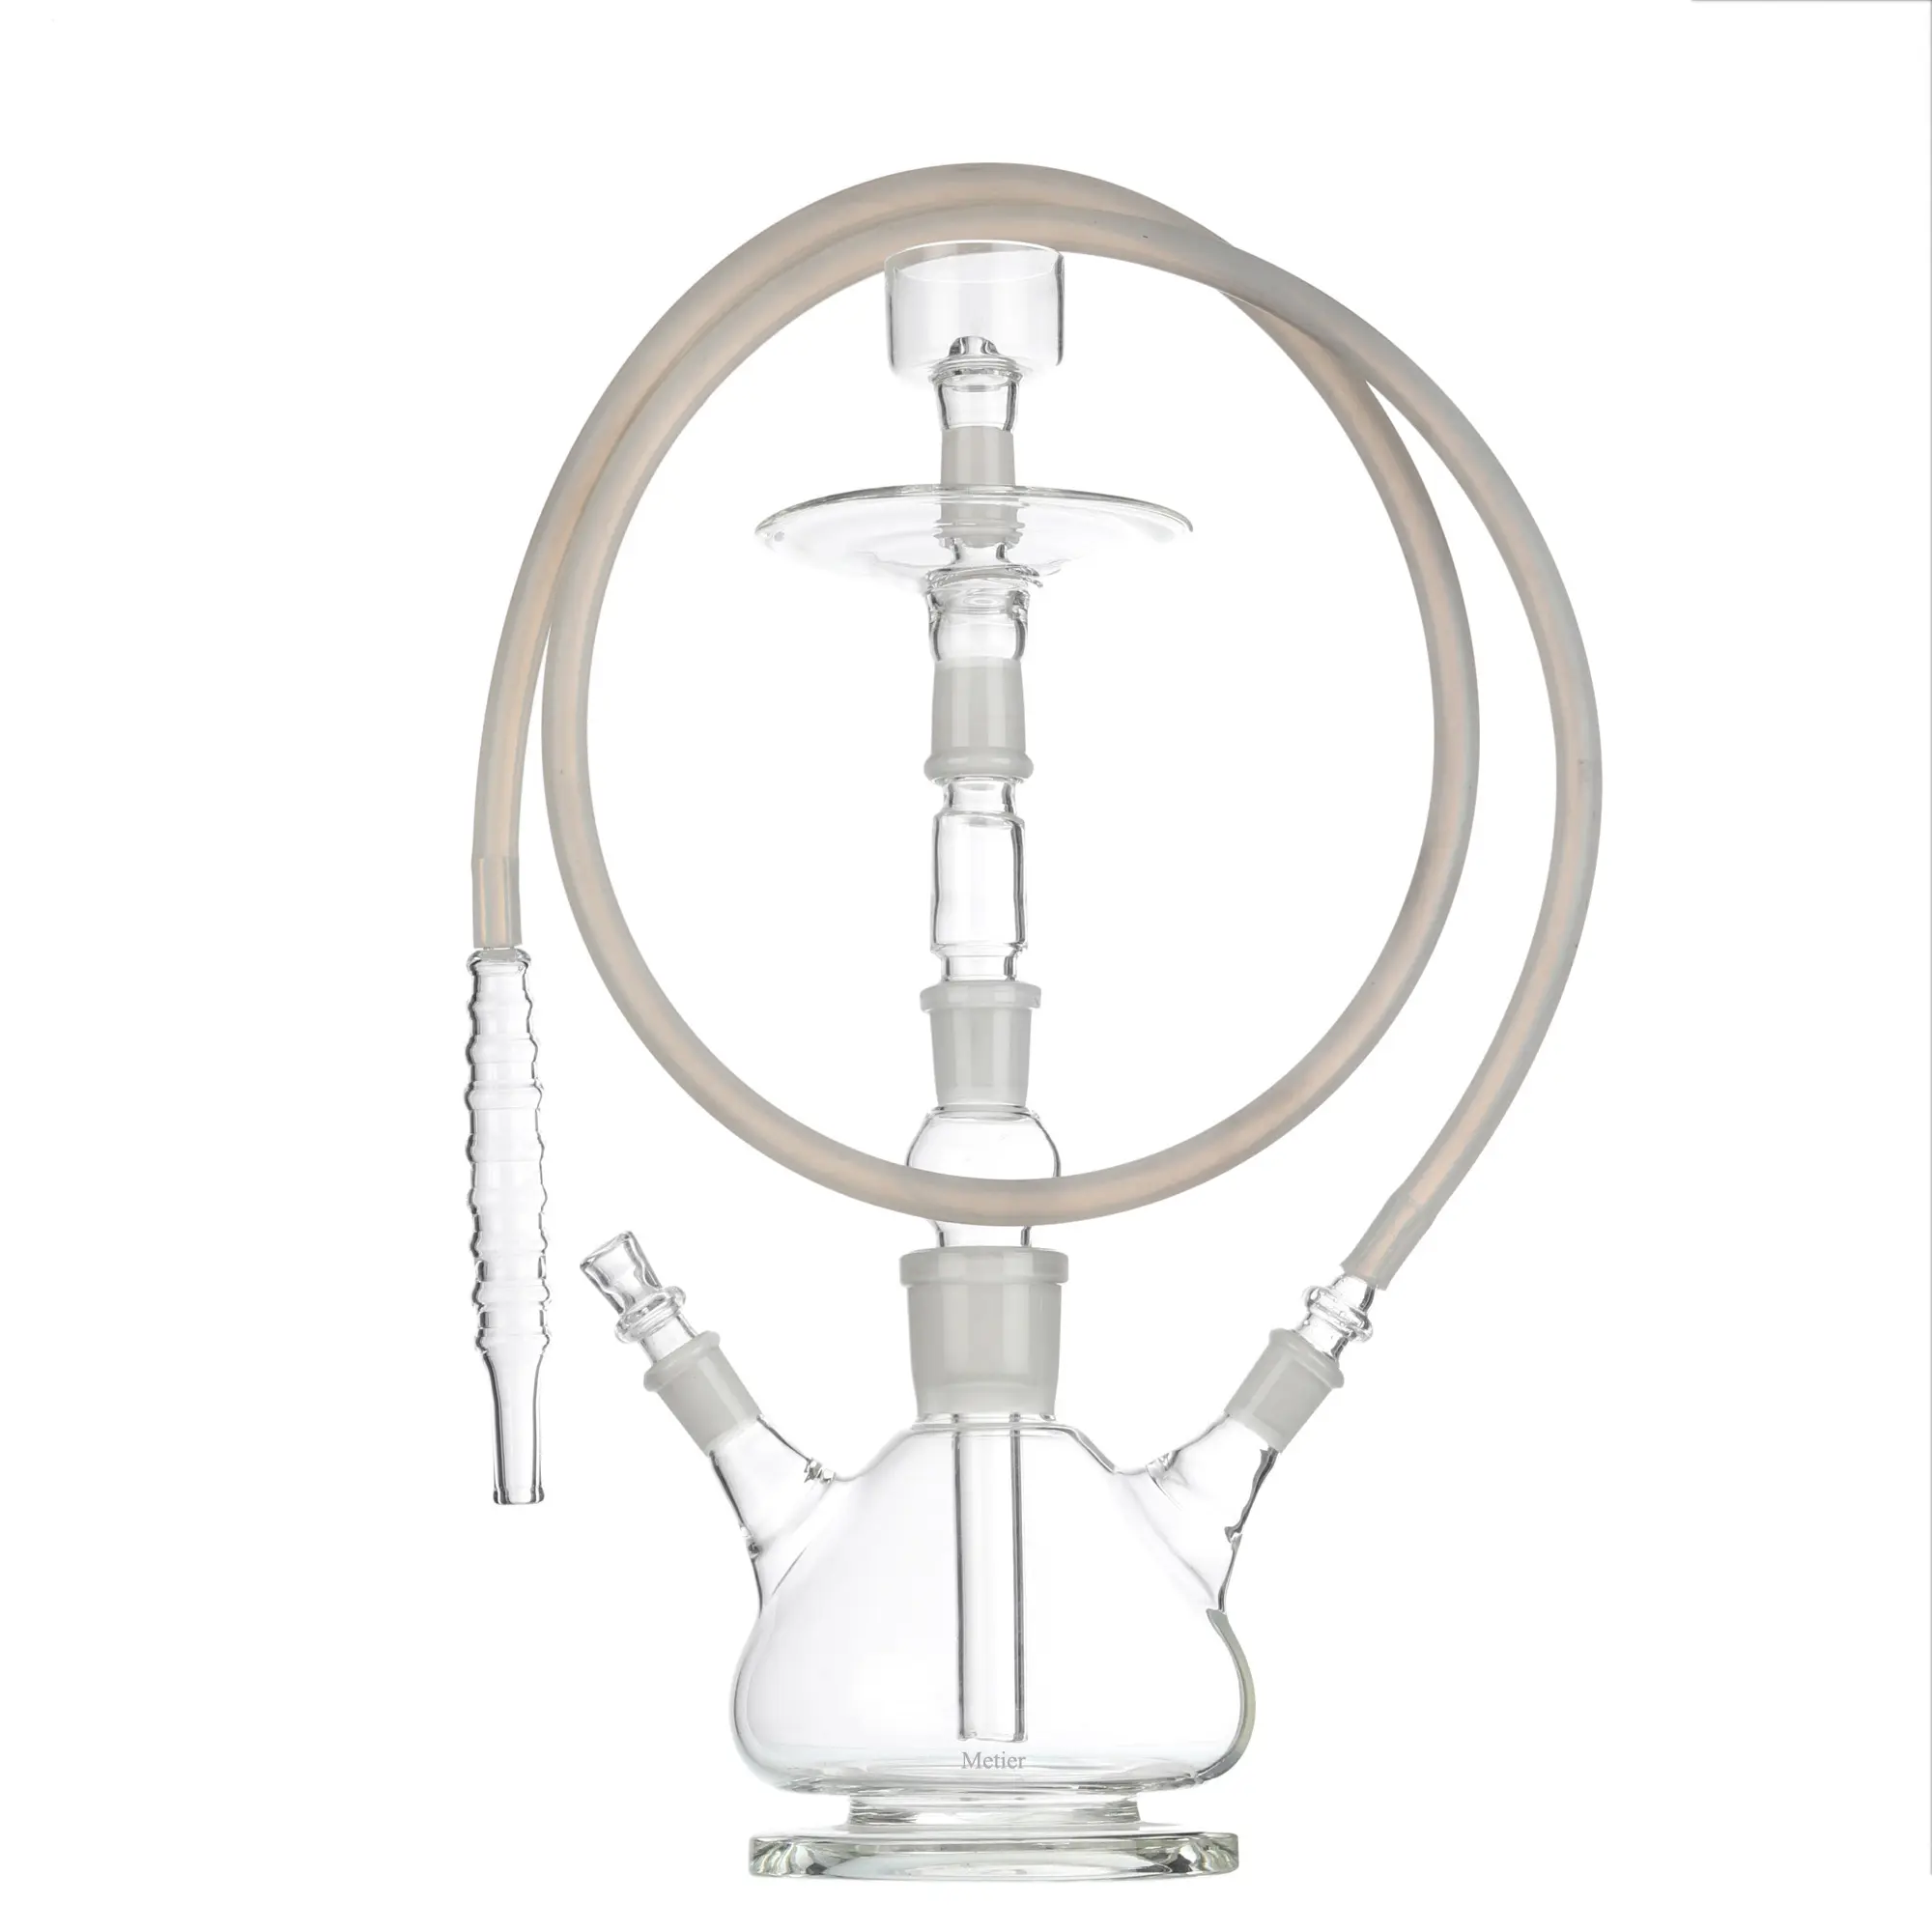 Metier Hand Blown Borosilicate Glass Hookah Customizable Dimension Eco-Friendly Water Pipe for Shisha Nargile from India